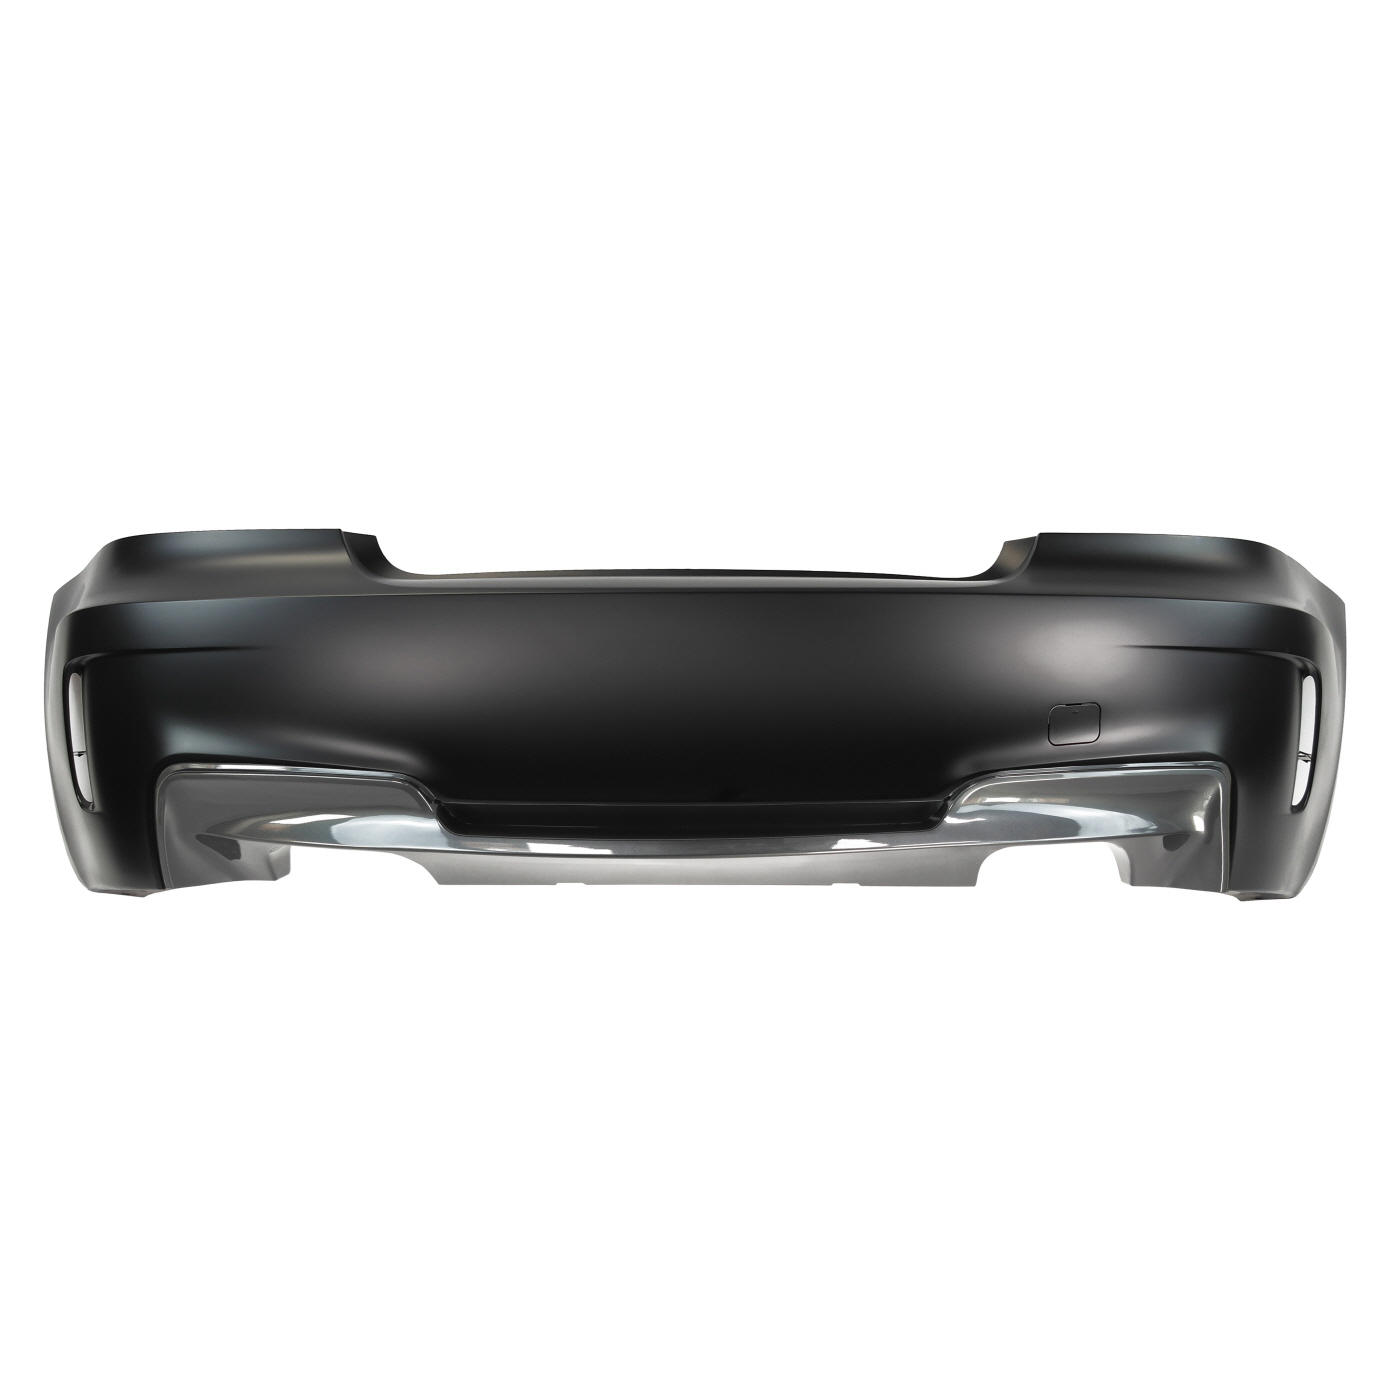 AIM9GT 2 BMW 1m rear bumper style for 1Series E82 08-13 all Coupe and Convertible  